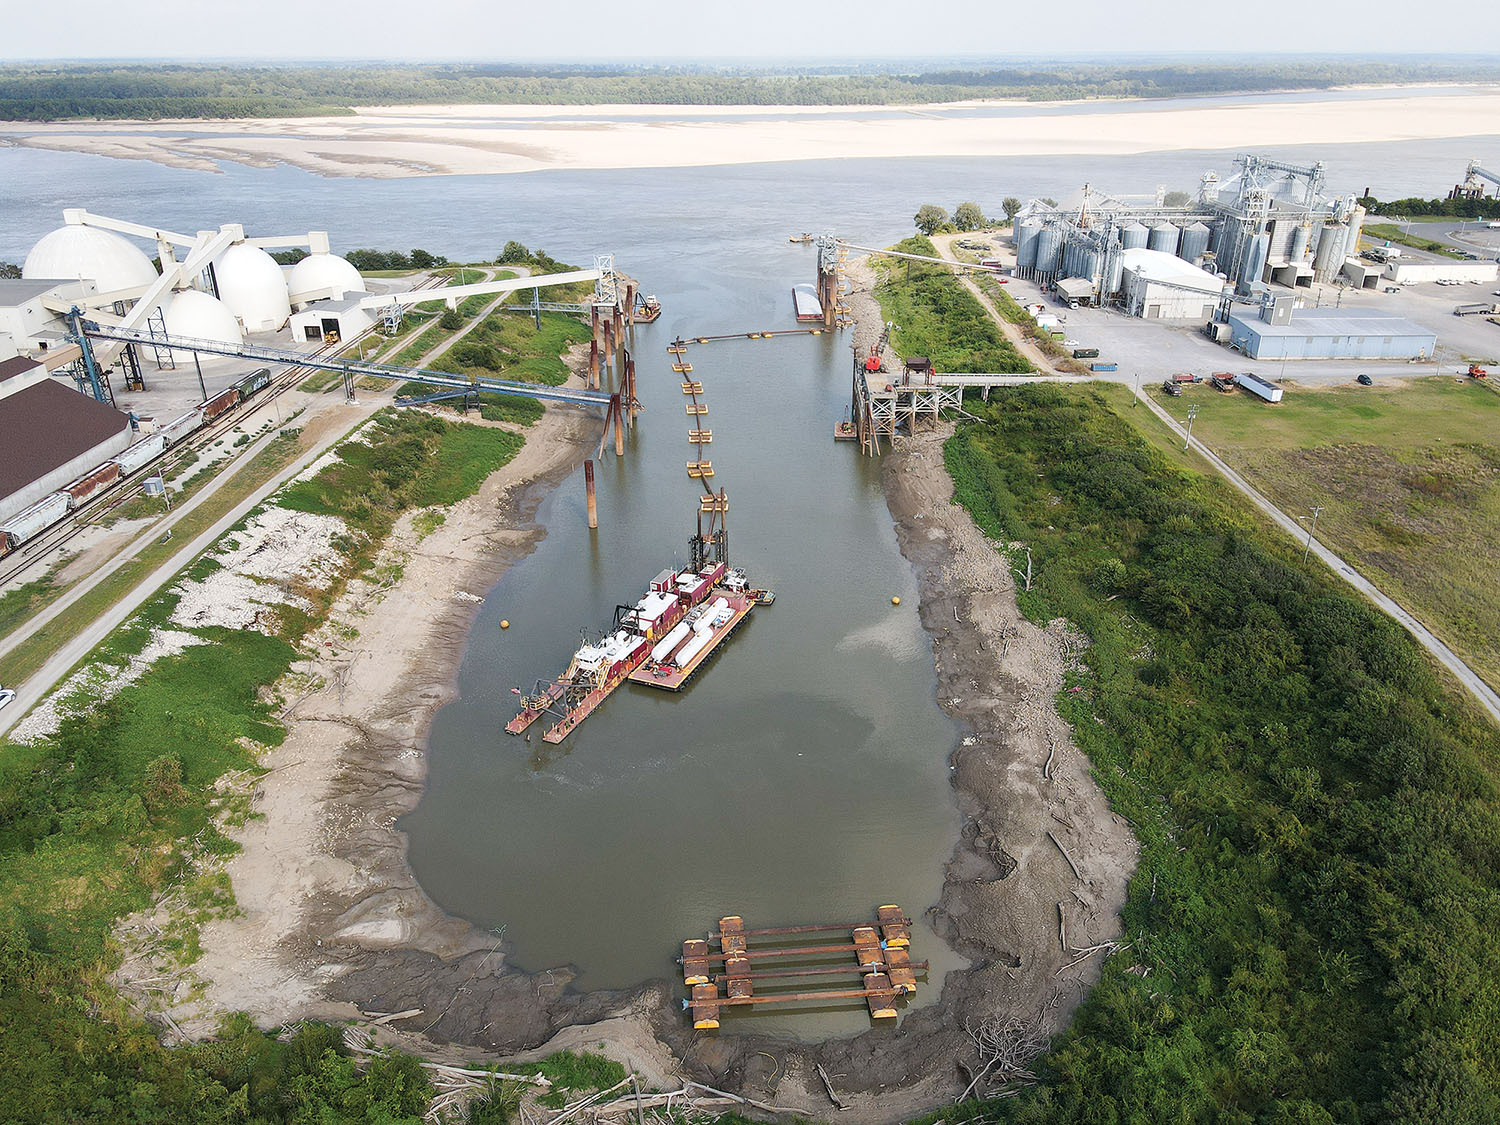 The Great Lakes Dredge & Dock Company dredge Iowa dredges in New Madrid County Harbor in 2021. The Memphis Engineer District has contracted with GLDD to dredge nine harbors in 2022. (Photo courtesy of Great Lakes Dredge & Dock)